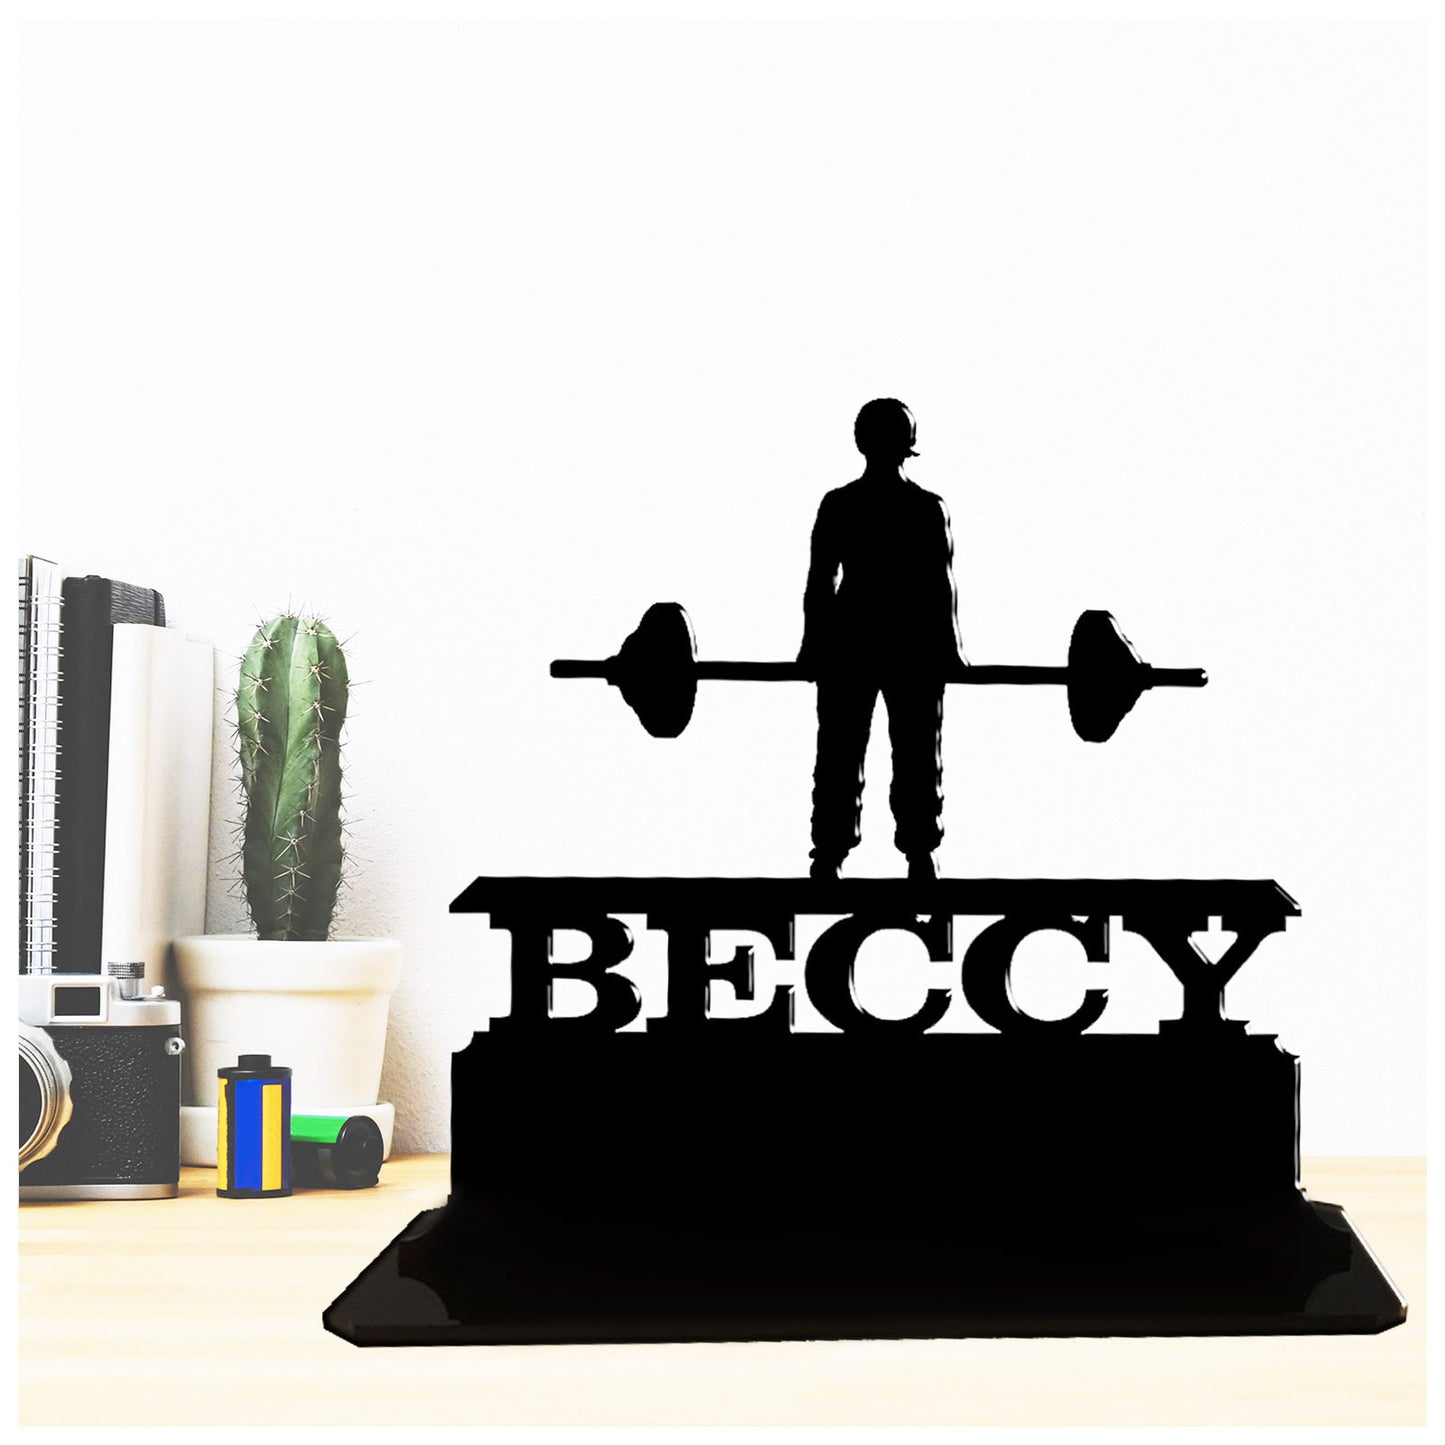 Acrylic unique personalised gifts for female powerlifters. Standalone ornament keepsake present.